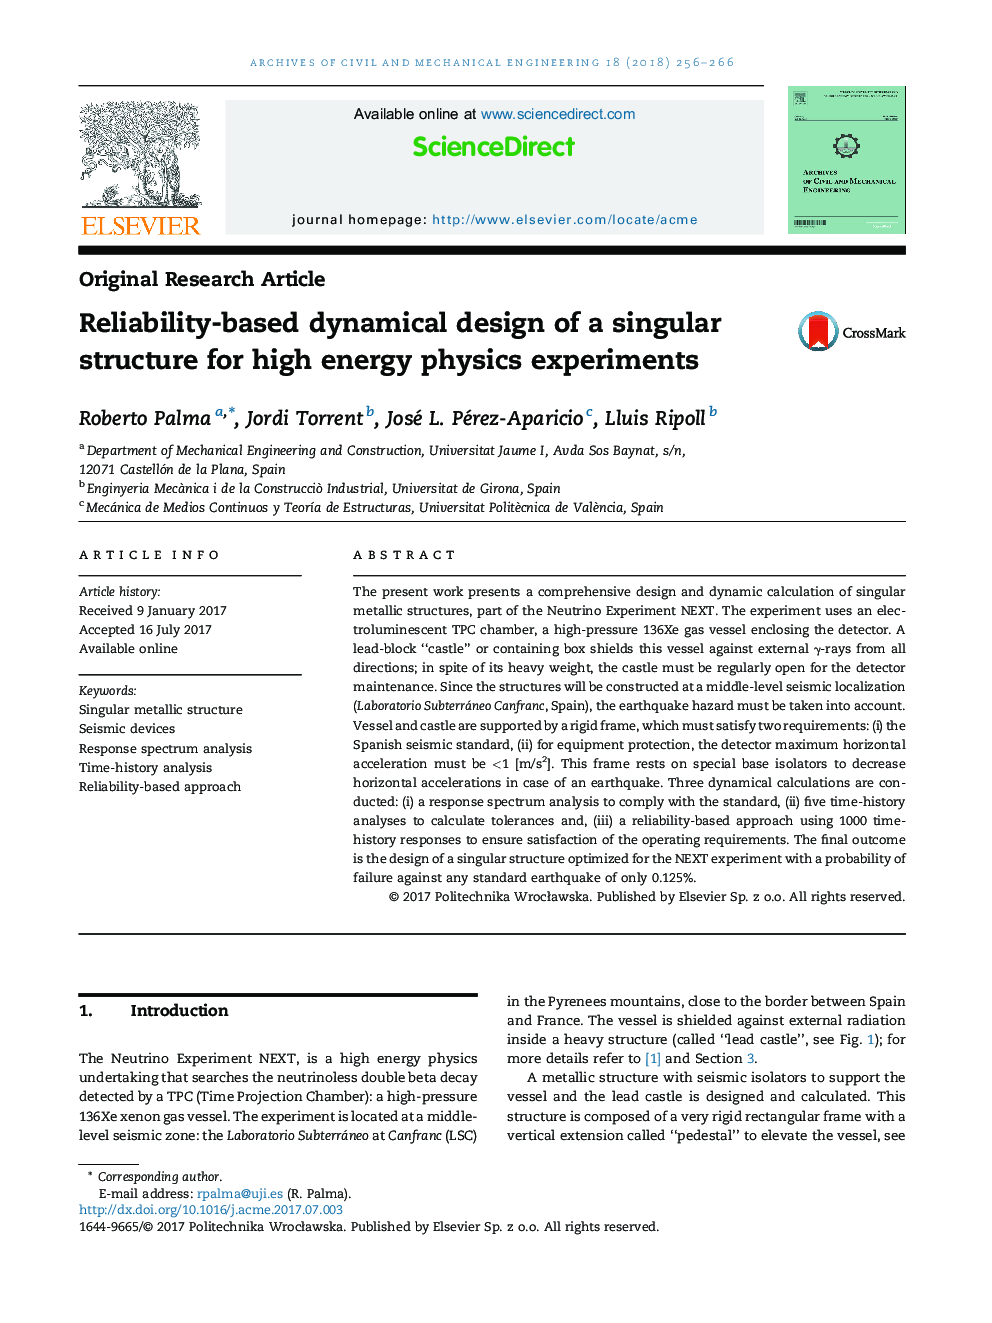 Reliability-based dynamical design of a singular structure for high energy physics experiments